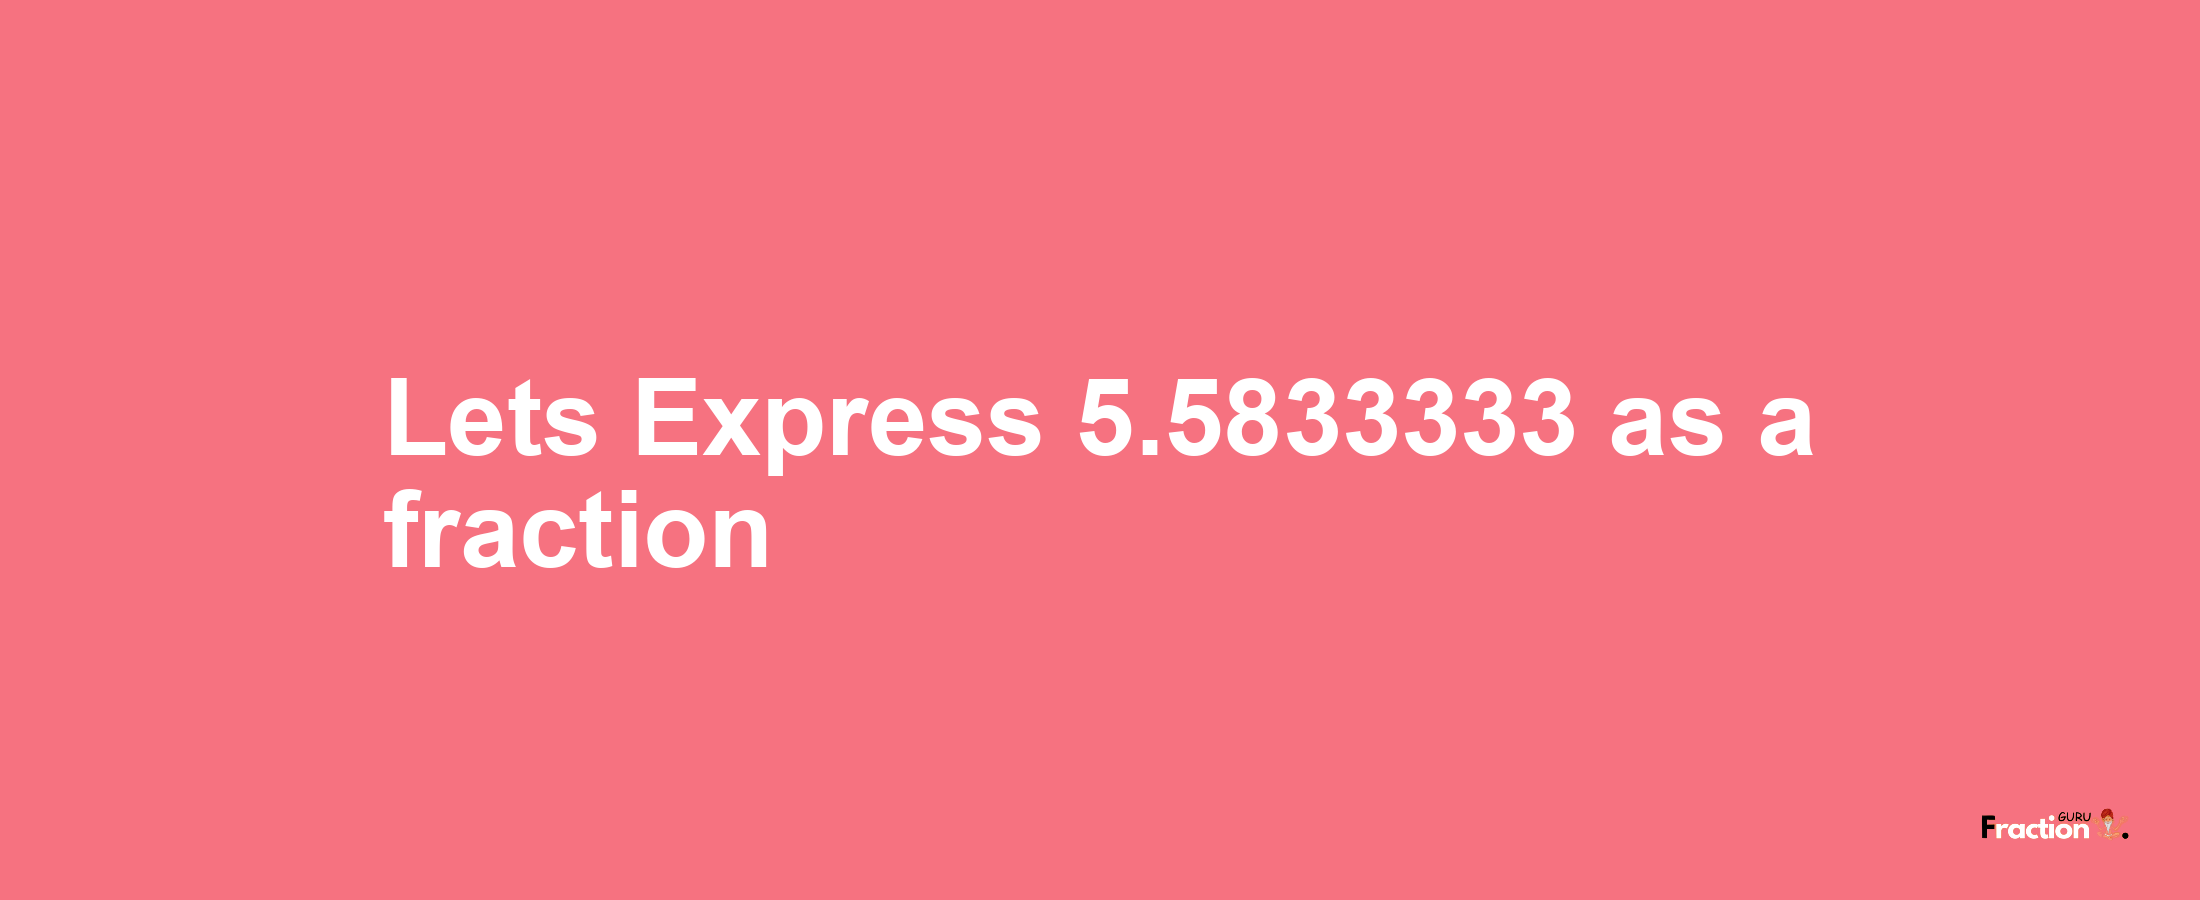 Lets Express 5.5833333 as afraction